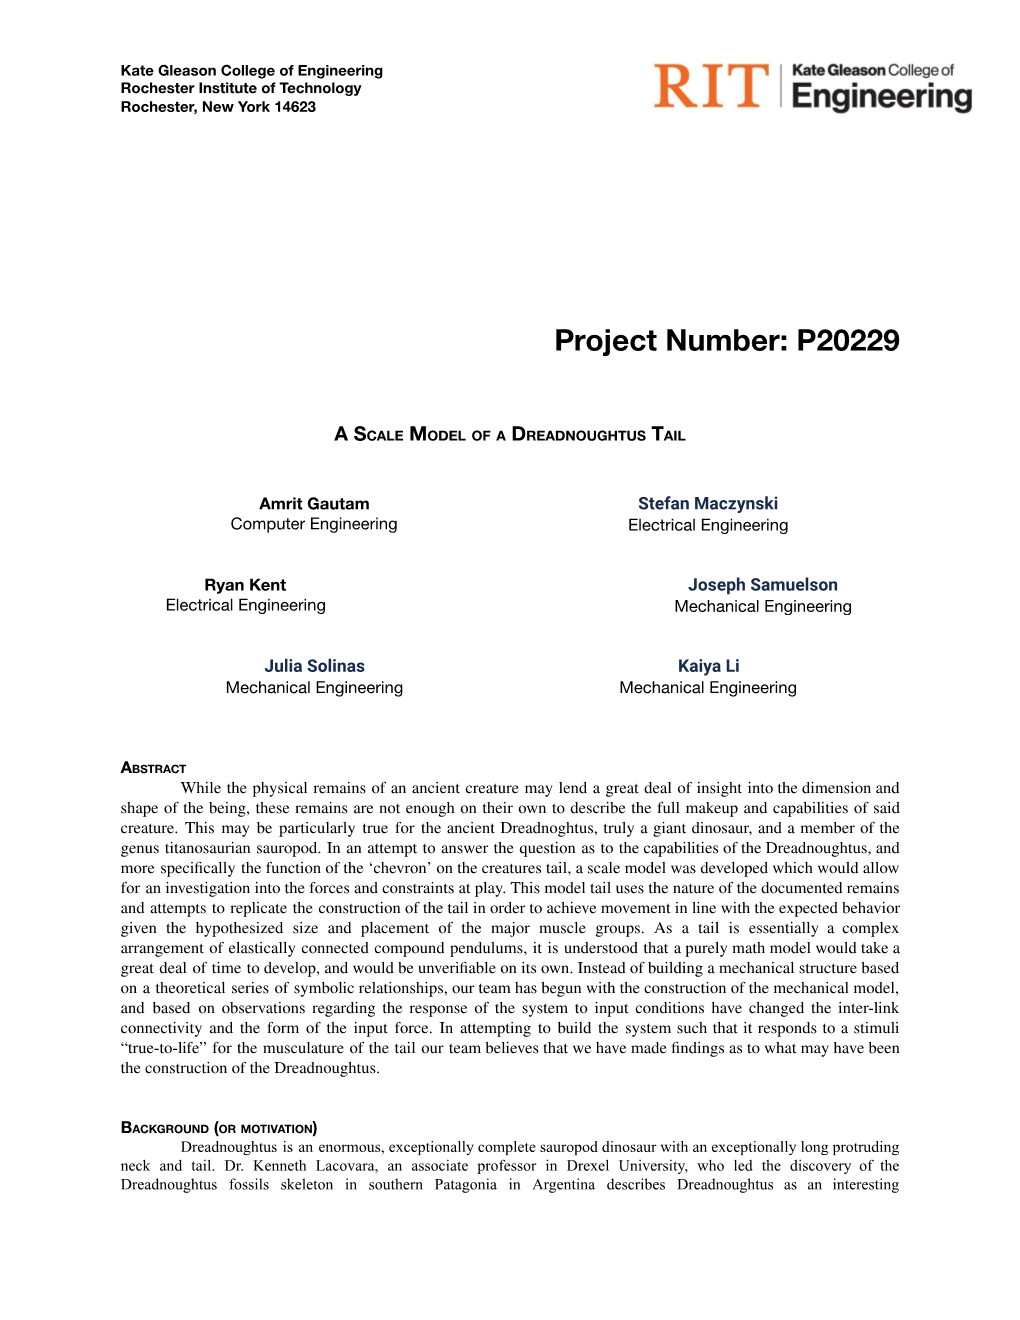 Project Number: P20229